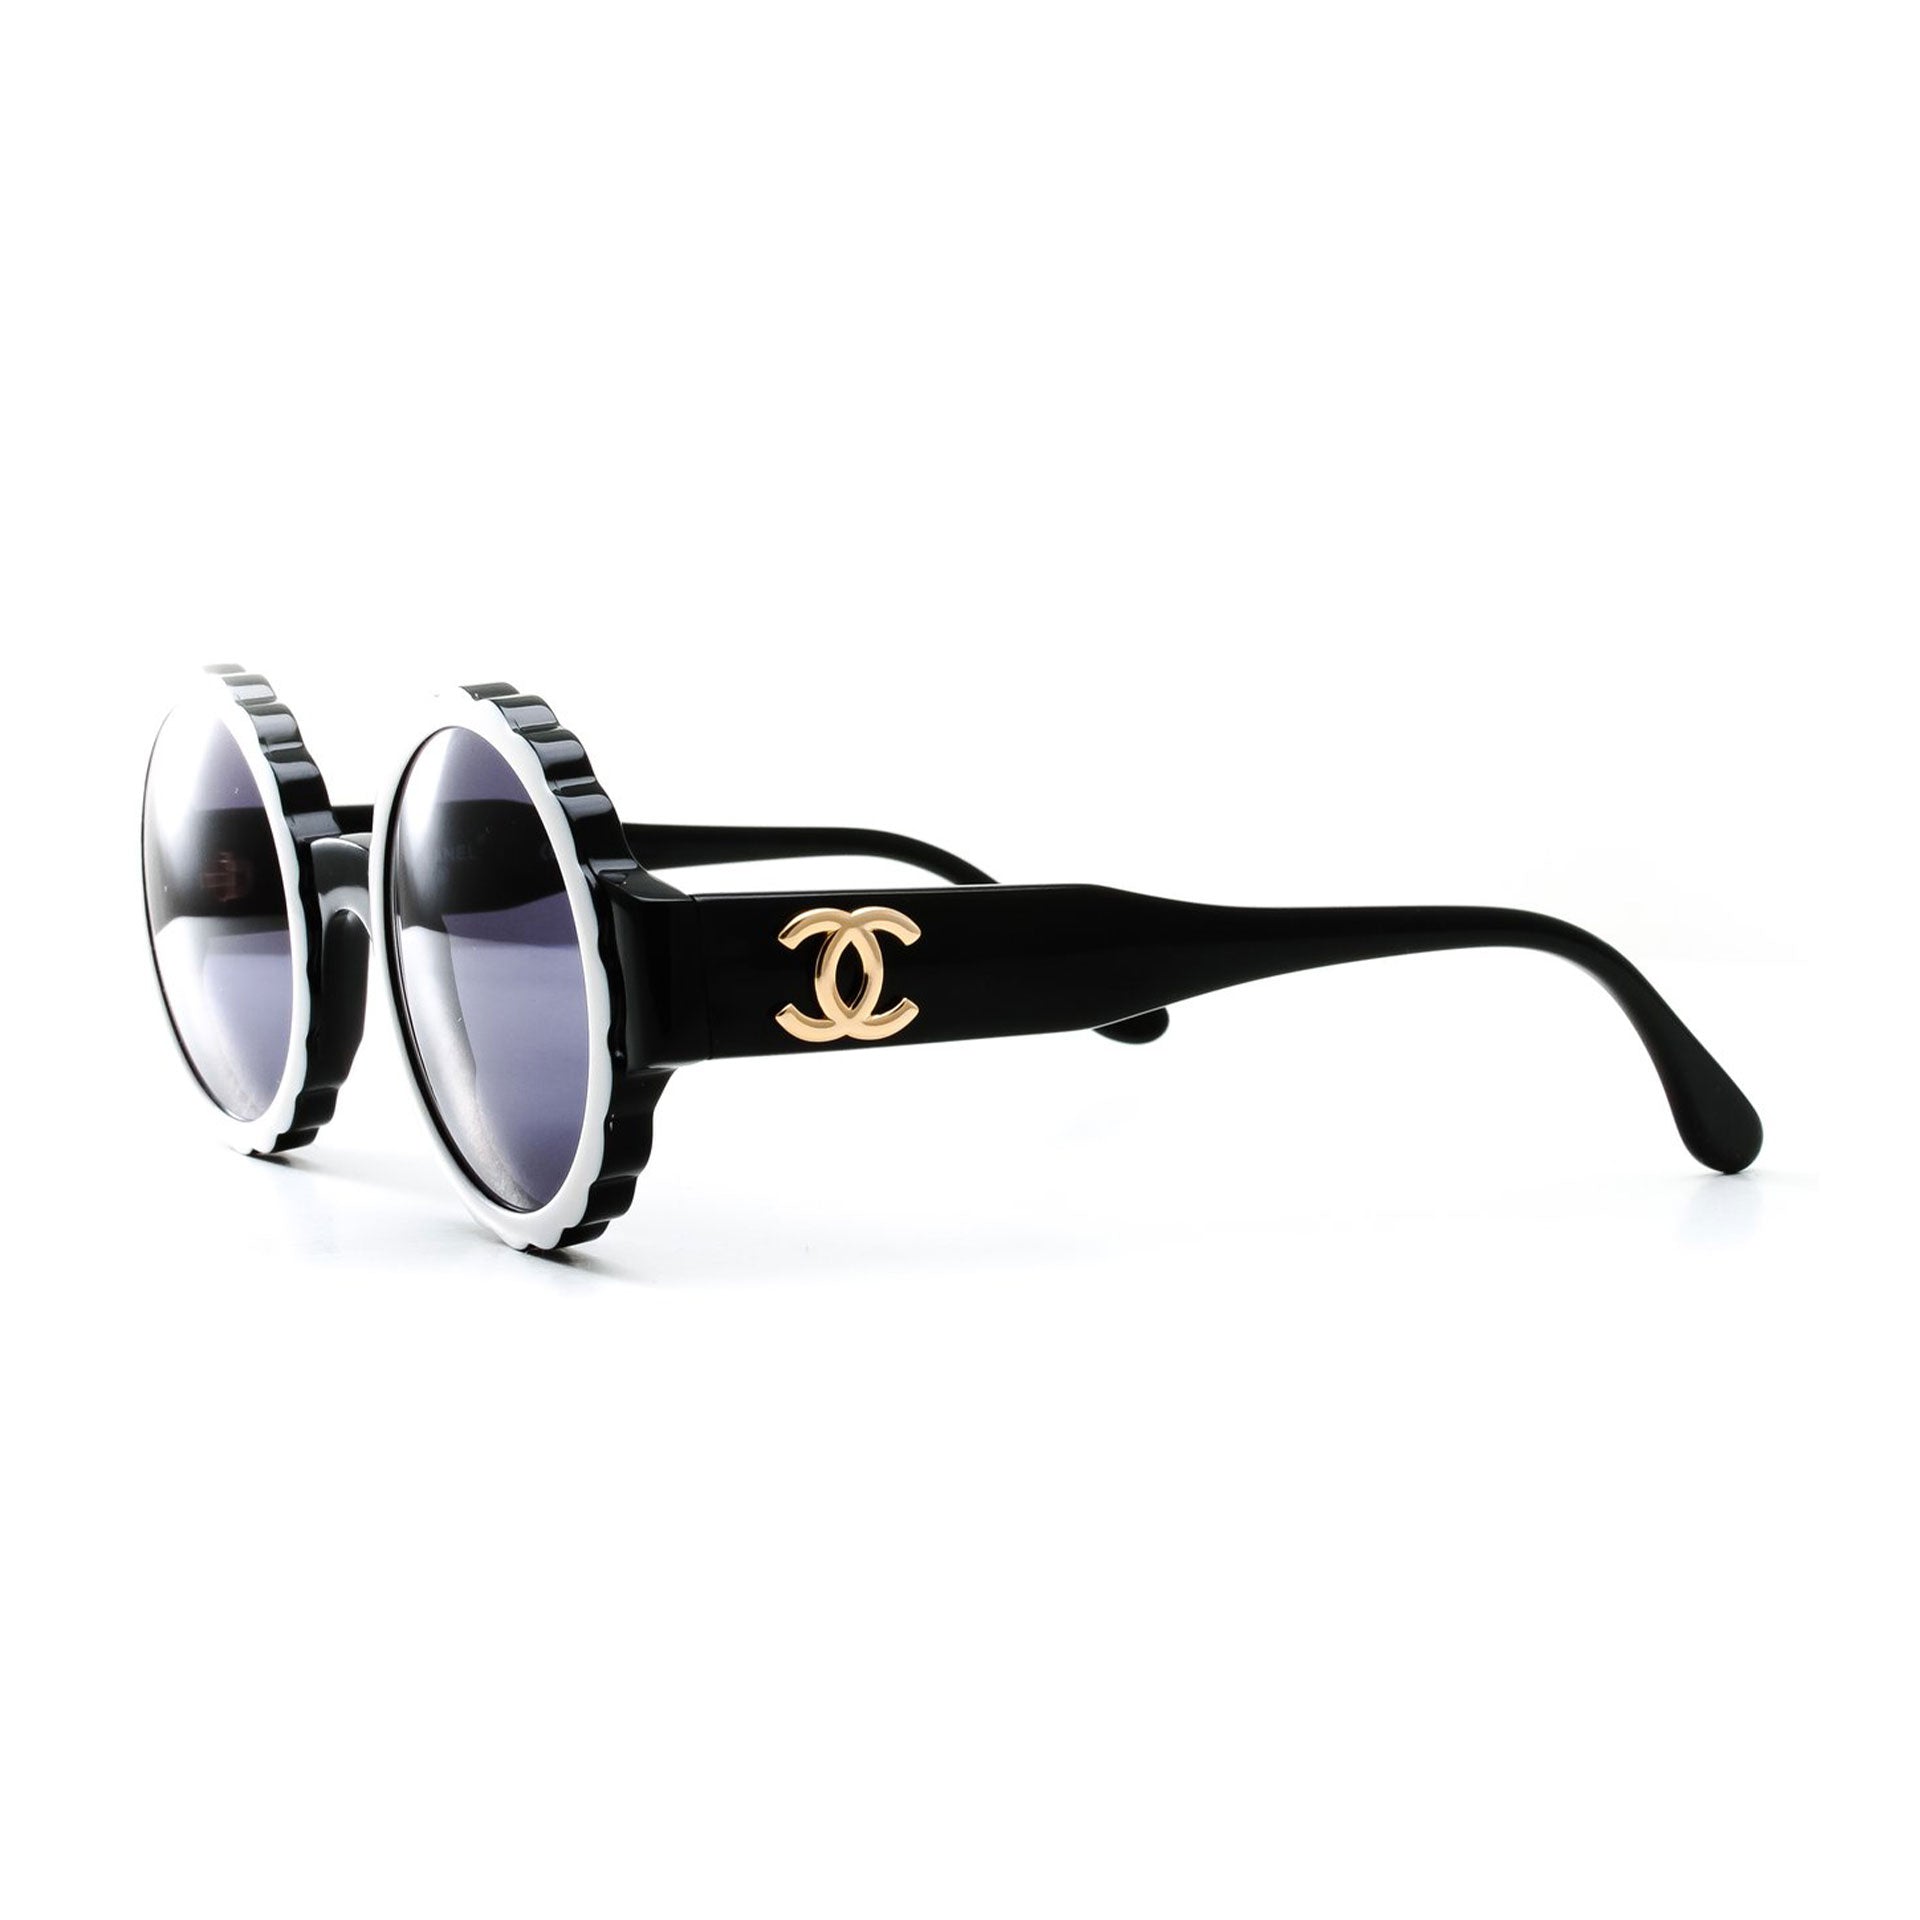 black and white chanel sunglasses vintage